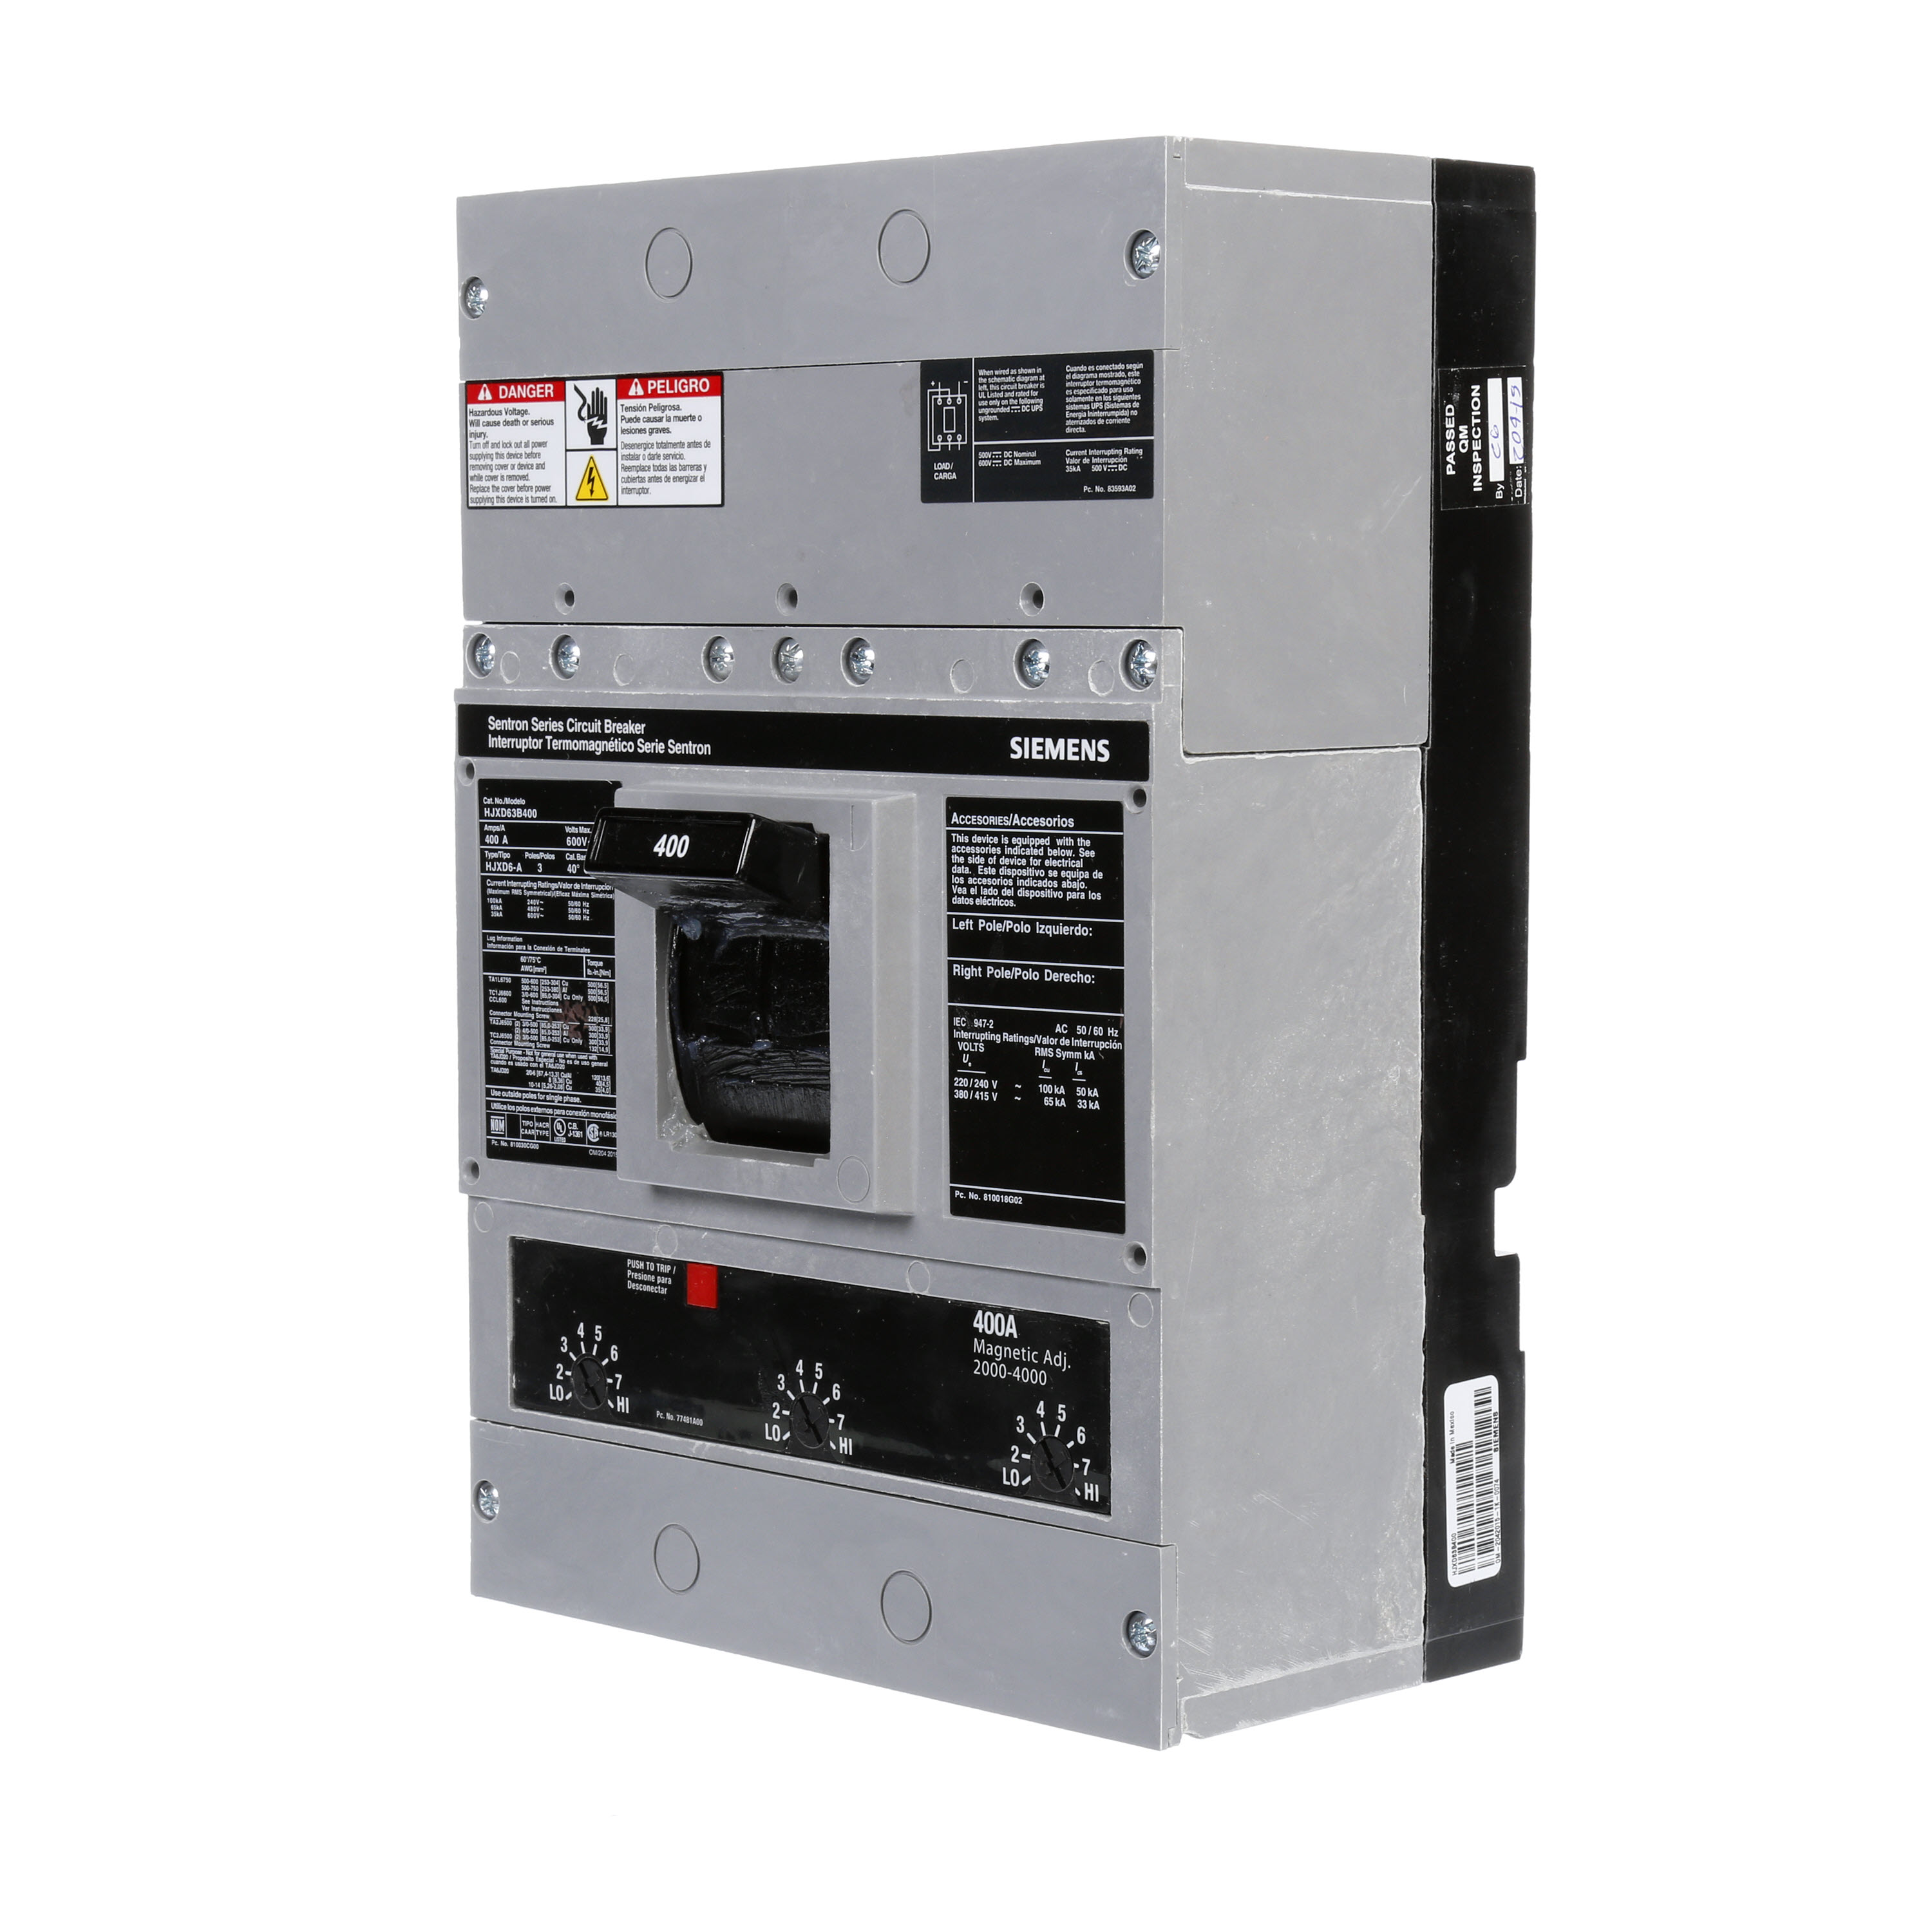 SIEMENS LOW VOLTAGE SENTRON MOLDED CASE CIRCUIT BREAKER WITH THERMAL - MAGNETICTRIP UNIT. ASSEMBLED STANDARD 40 DEG C BREAKER JD FRAME WITH HIGH BREAKING CAPACITY. 400A 3-POLE (35KAIC AT 600V) (65KAIC AT 480V). NON-INTERCHANGEABLE TRIP UNIT. SPECIAL FEATURES NO LUGS INSTALLED. DIMENSIONS (W x H x D) IN 7.50 x 11.0 x 4.00.